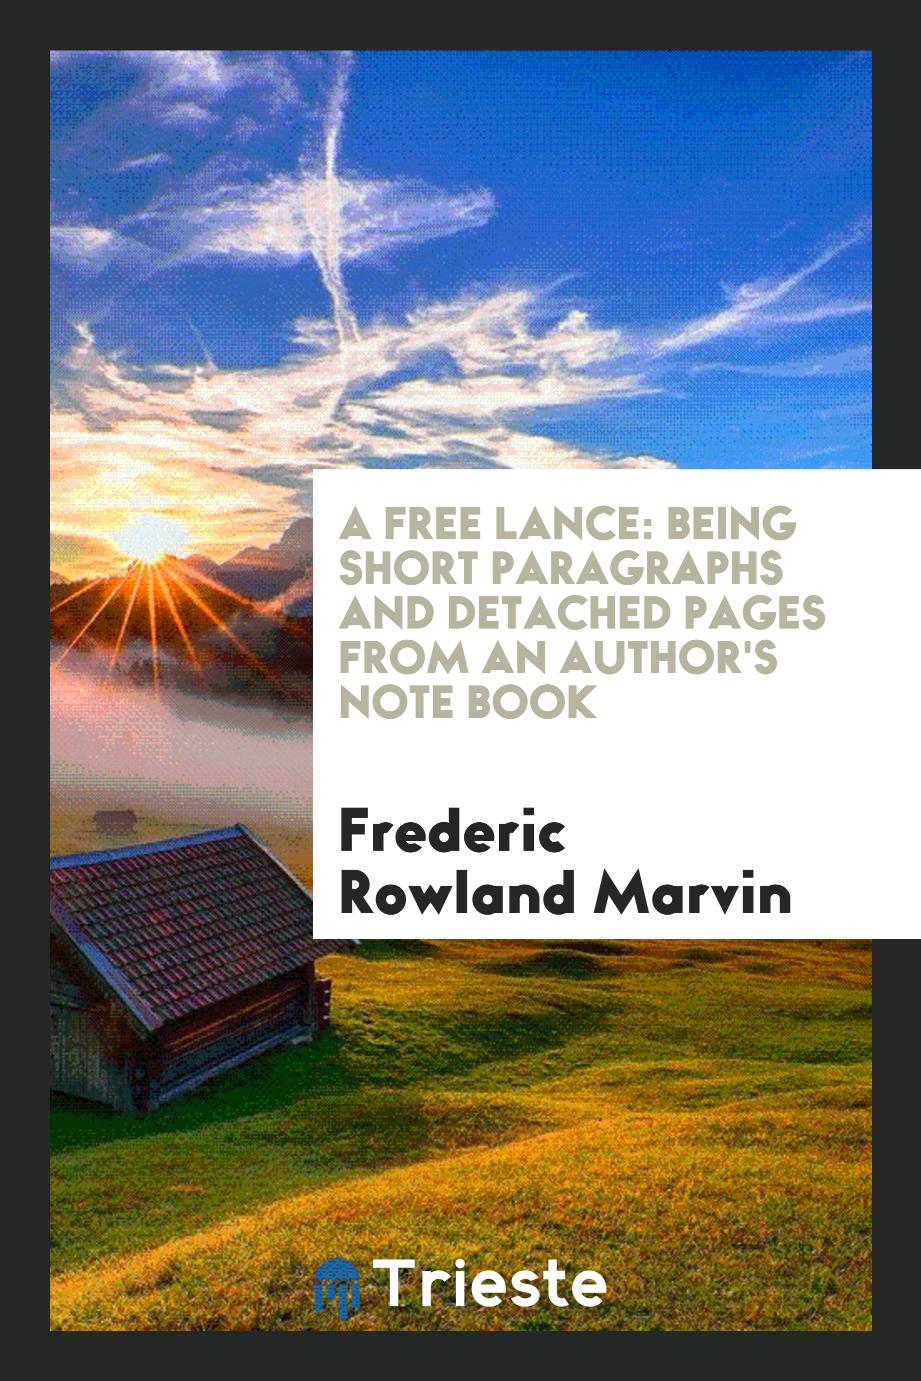 A Free Lance: Being Short Paragraphs and Detached Pages from an Author's Note Book